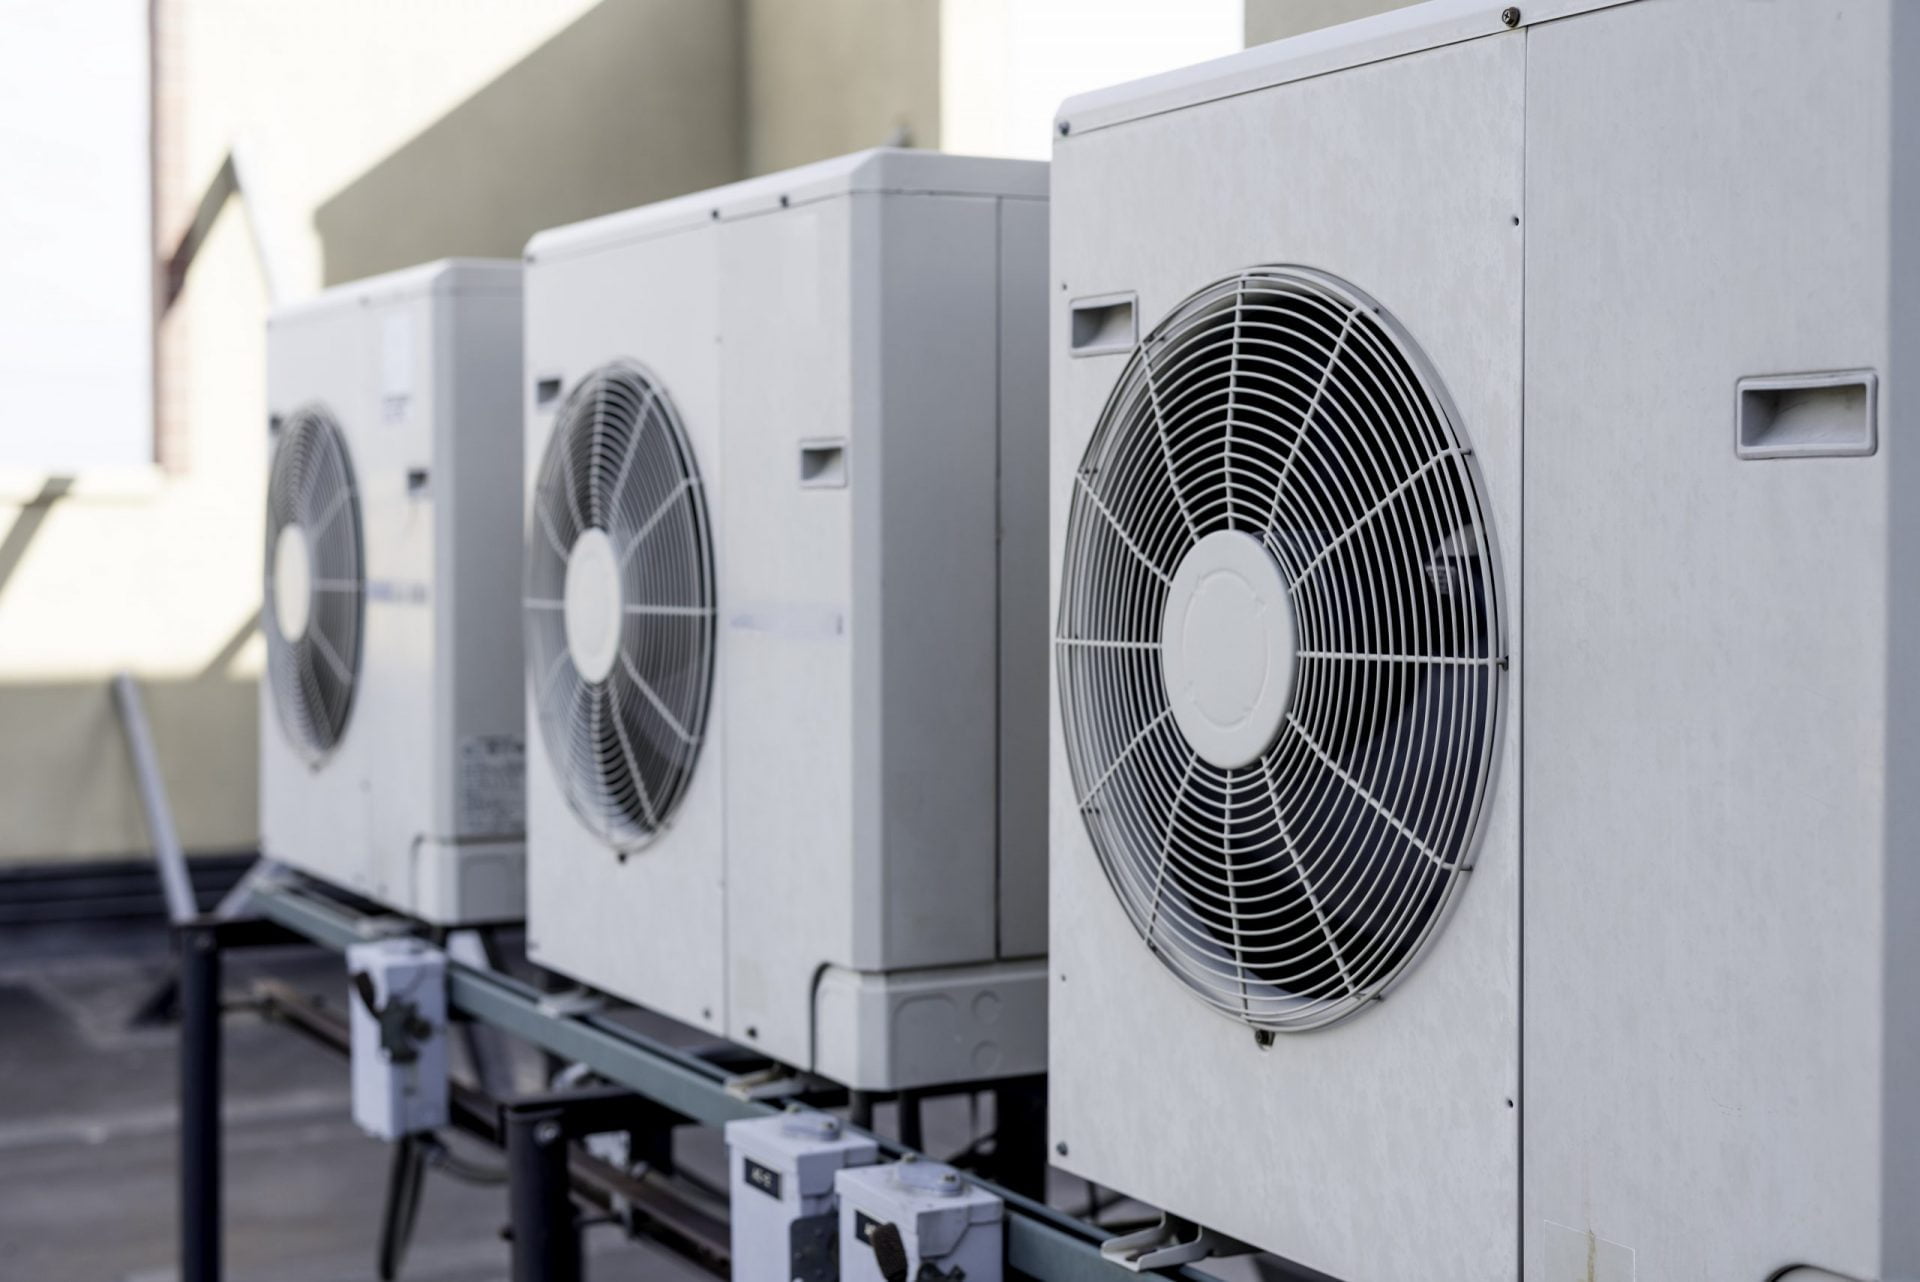 Condenser - Heating, ventilation, and air conditioning